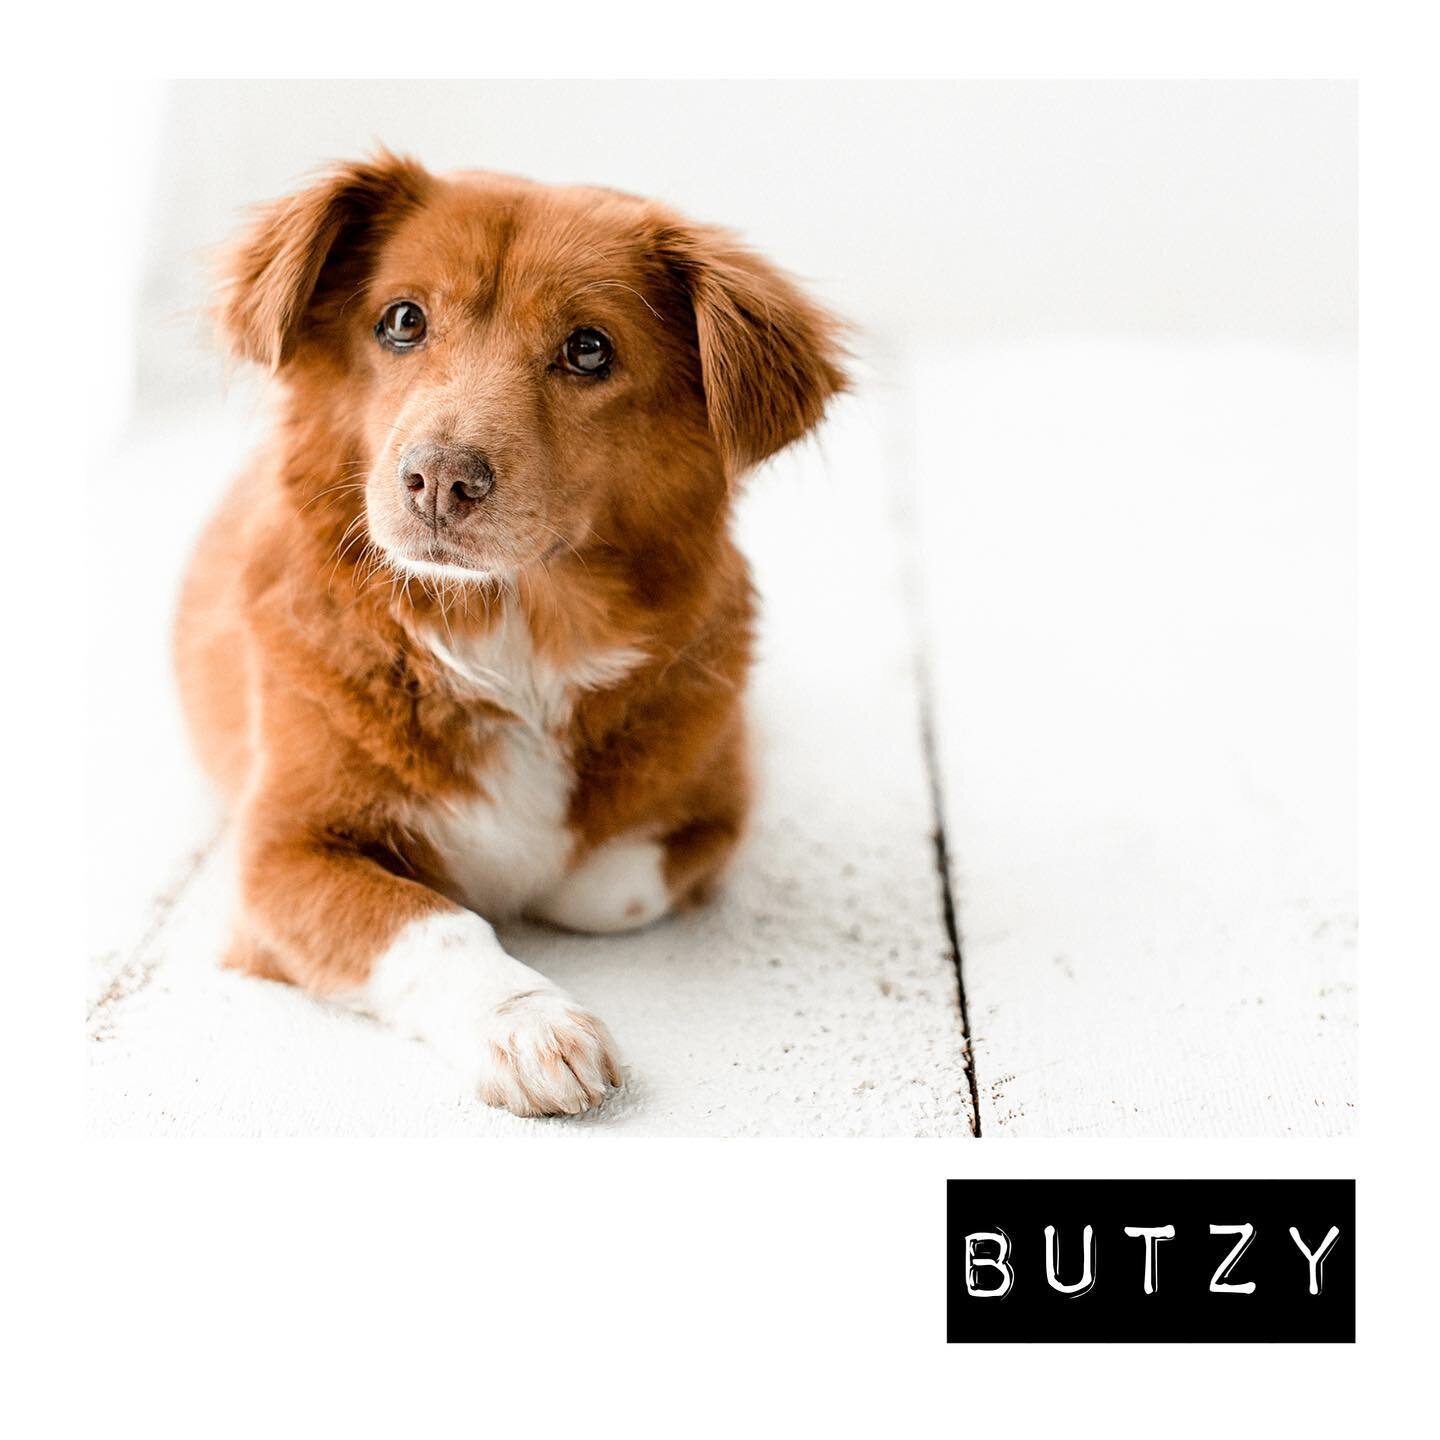 Butzy 🖤 ::ADOPTED::

Miss Boots found her forever family this week and is going home today! We are so excited for this charming short stack. 💘
&bull;
&bull;
&bull;
#thisiswhy #dogrescue #fosteringsaveslives #rescuedog #koreanrescuedog #pdxrescuedog